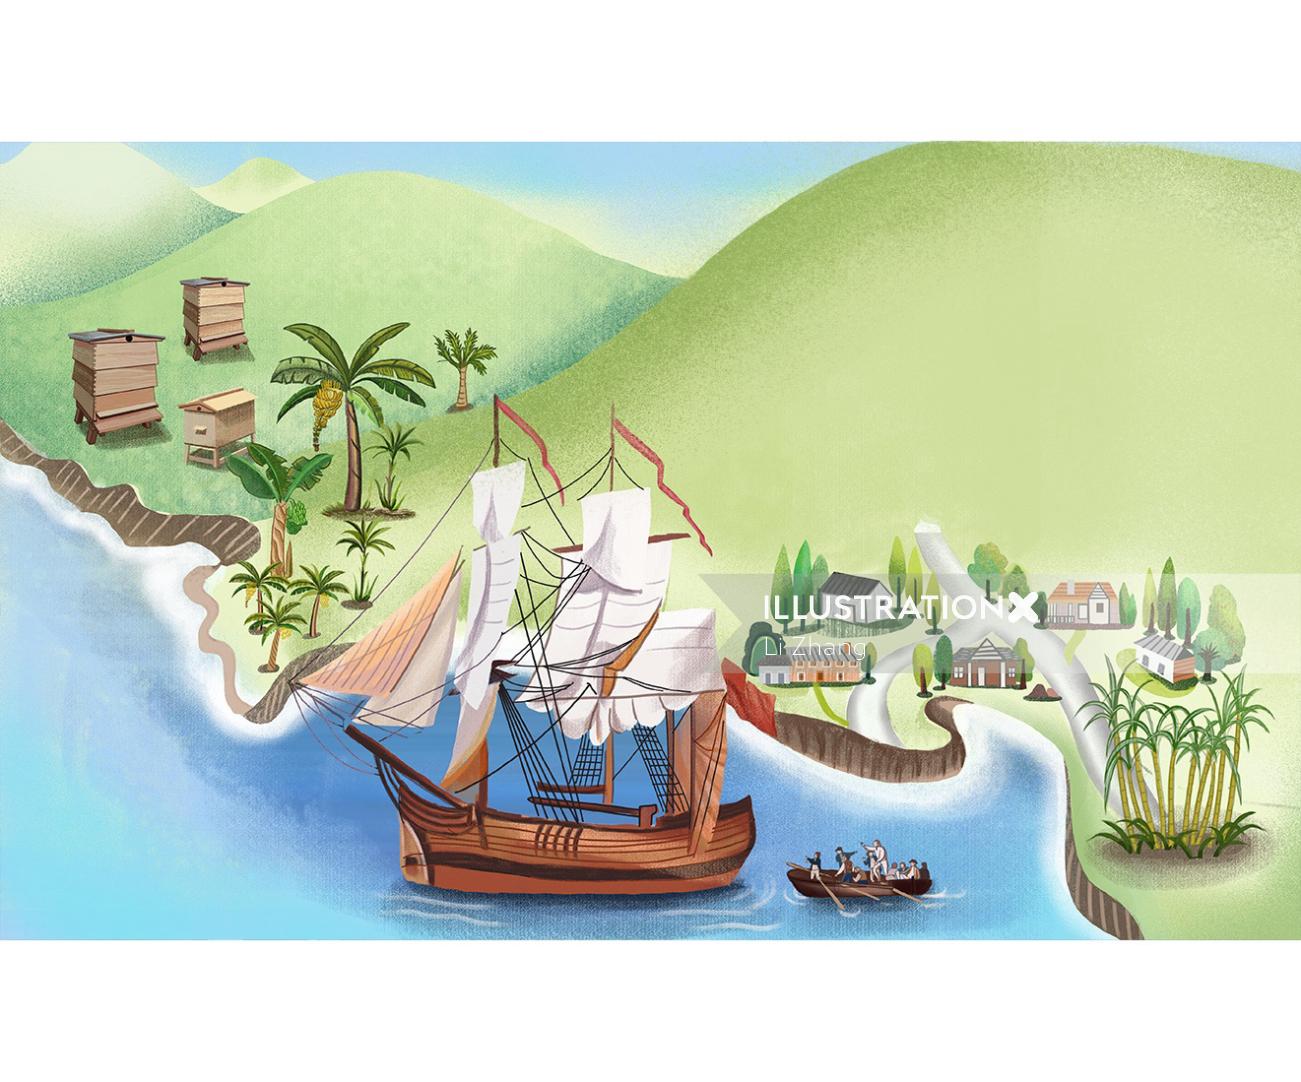 Graphic illustration of Pitcairn Island, Pacific Ocean